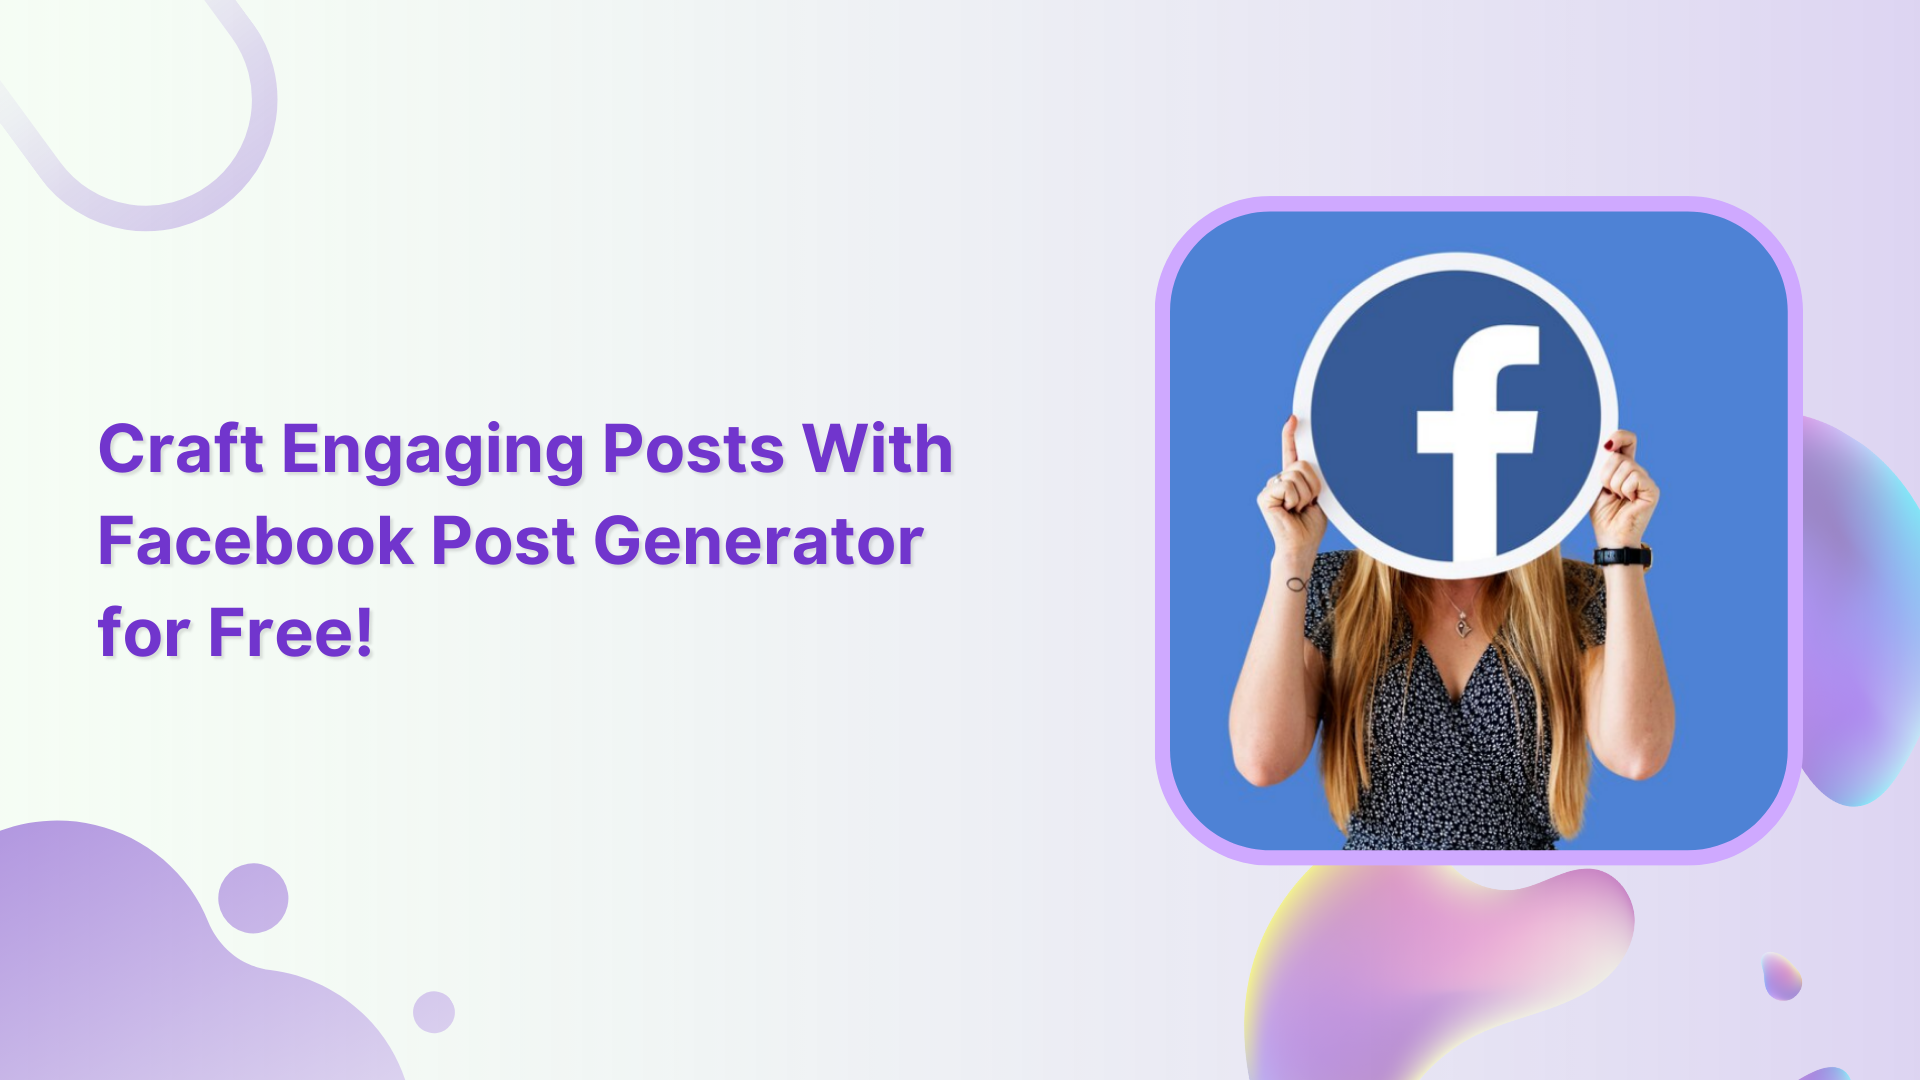 How to Craft Engaging Posts With Facebook Post Generator for Free?